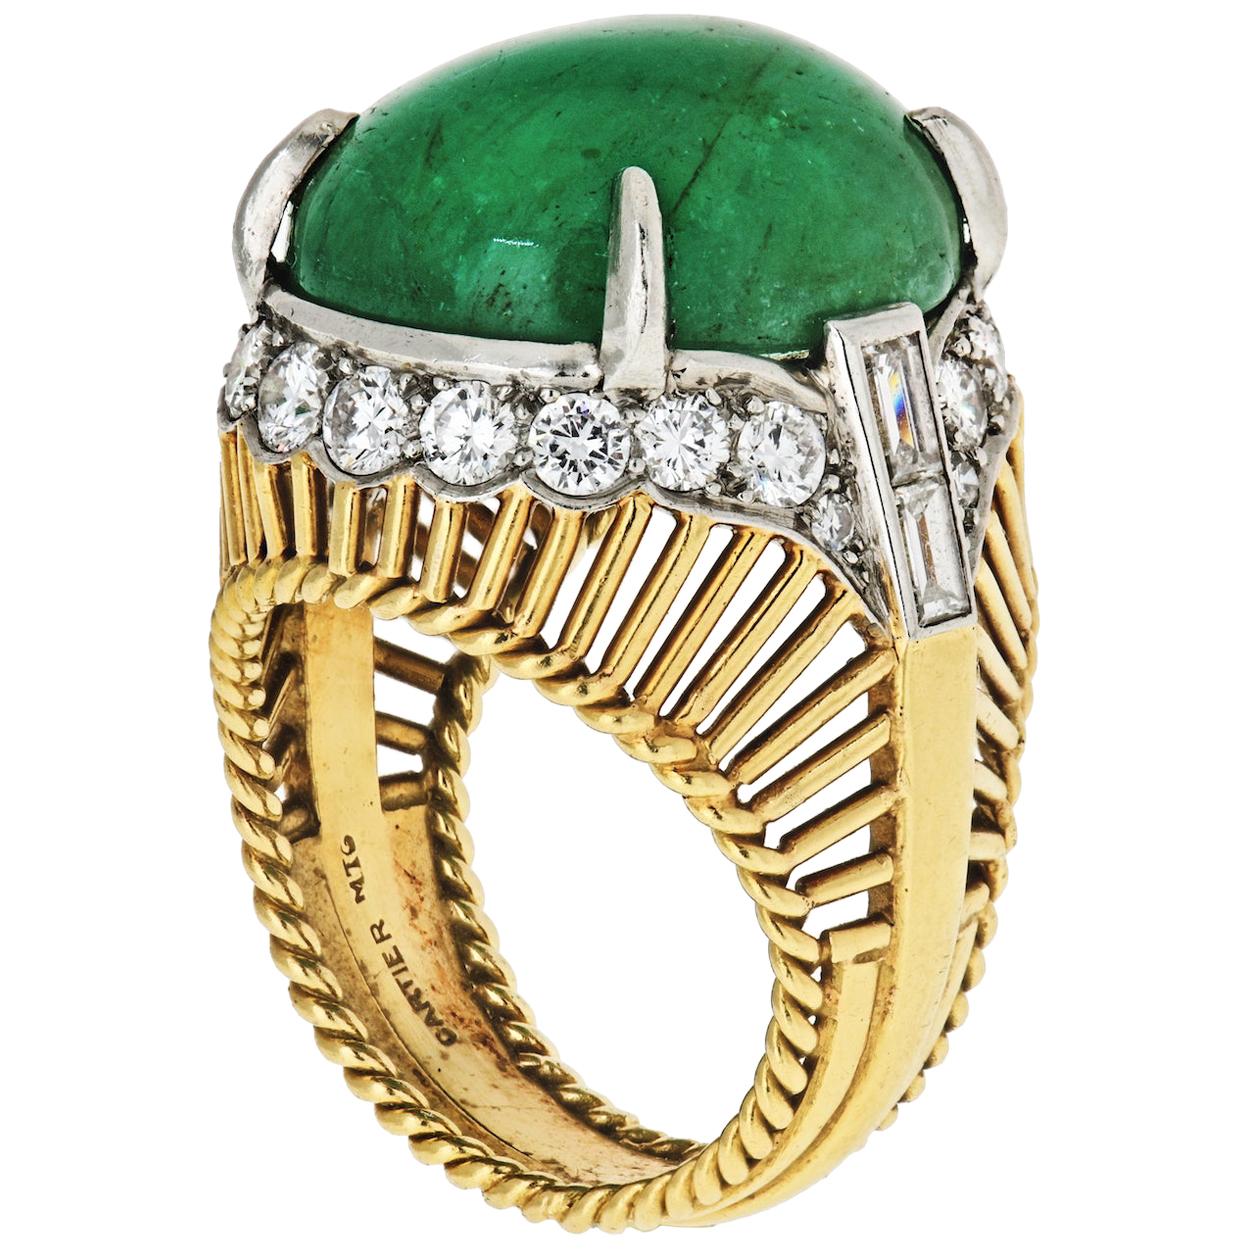 Cartier 1960s Cocktail Ring with 15 Carat Green Cabochon-Cut Emerald